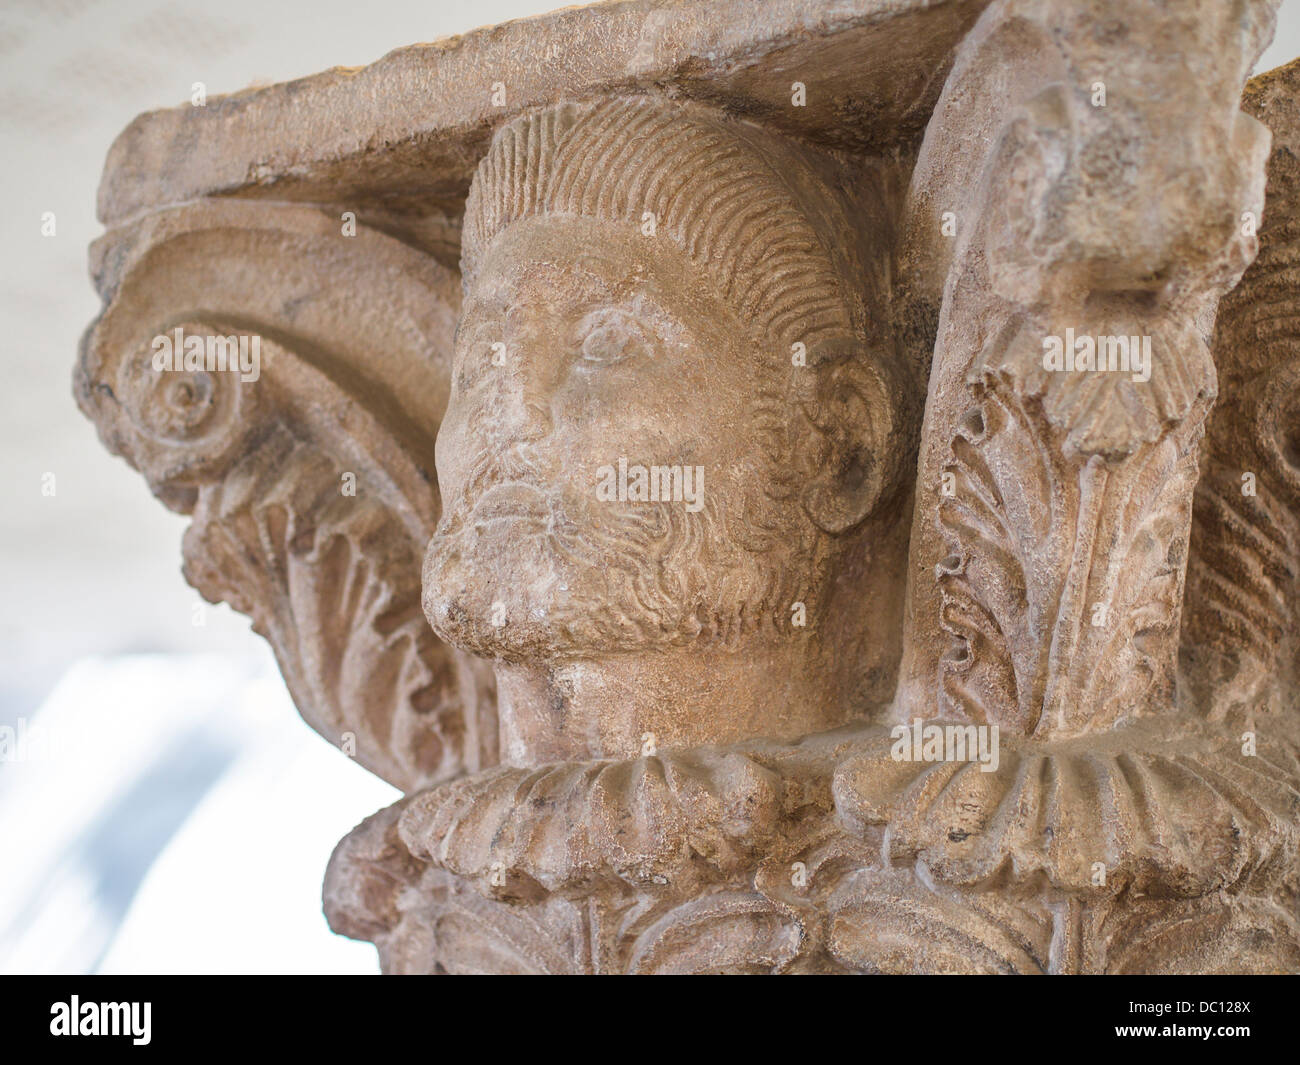 Detail from a stone capital. Artifact recovered from Glanum. Stock Photo